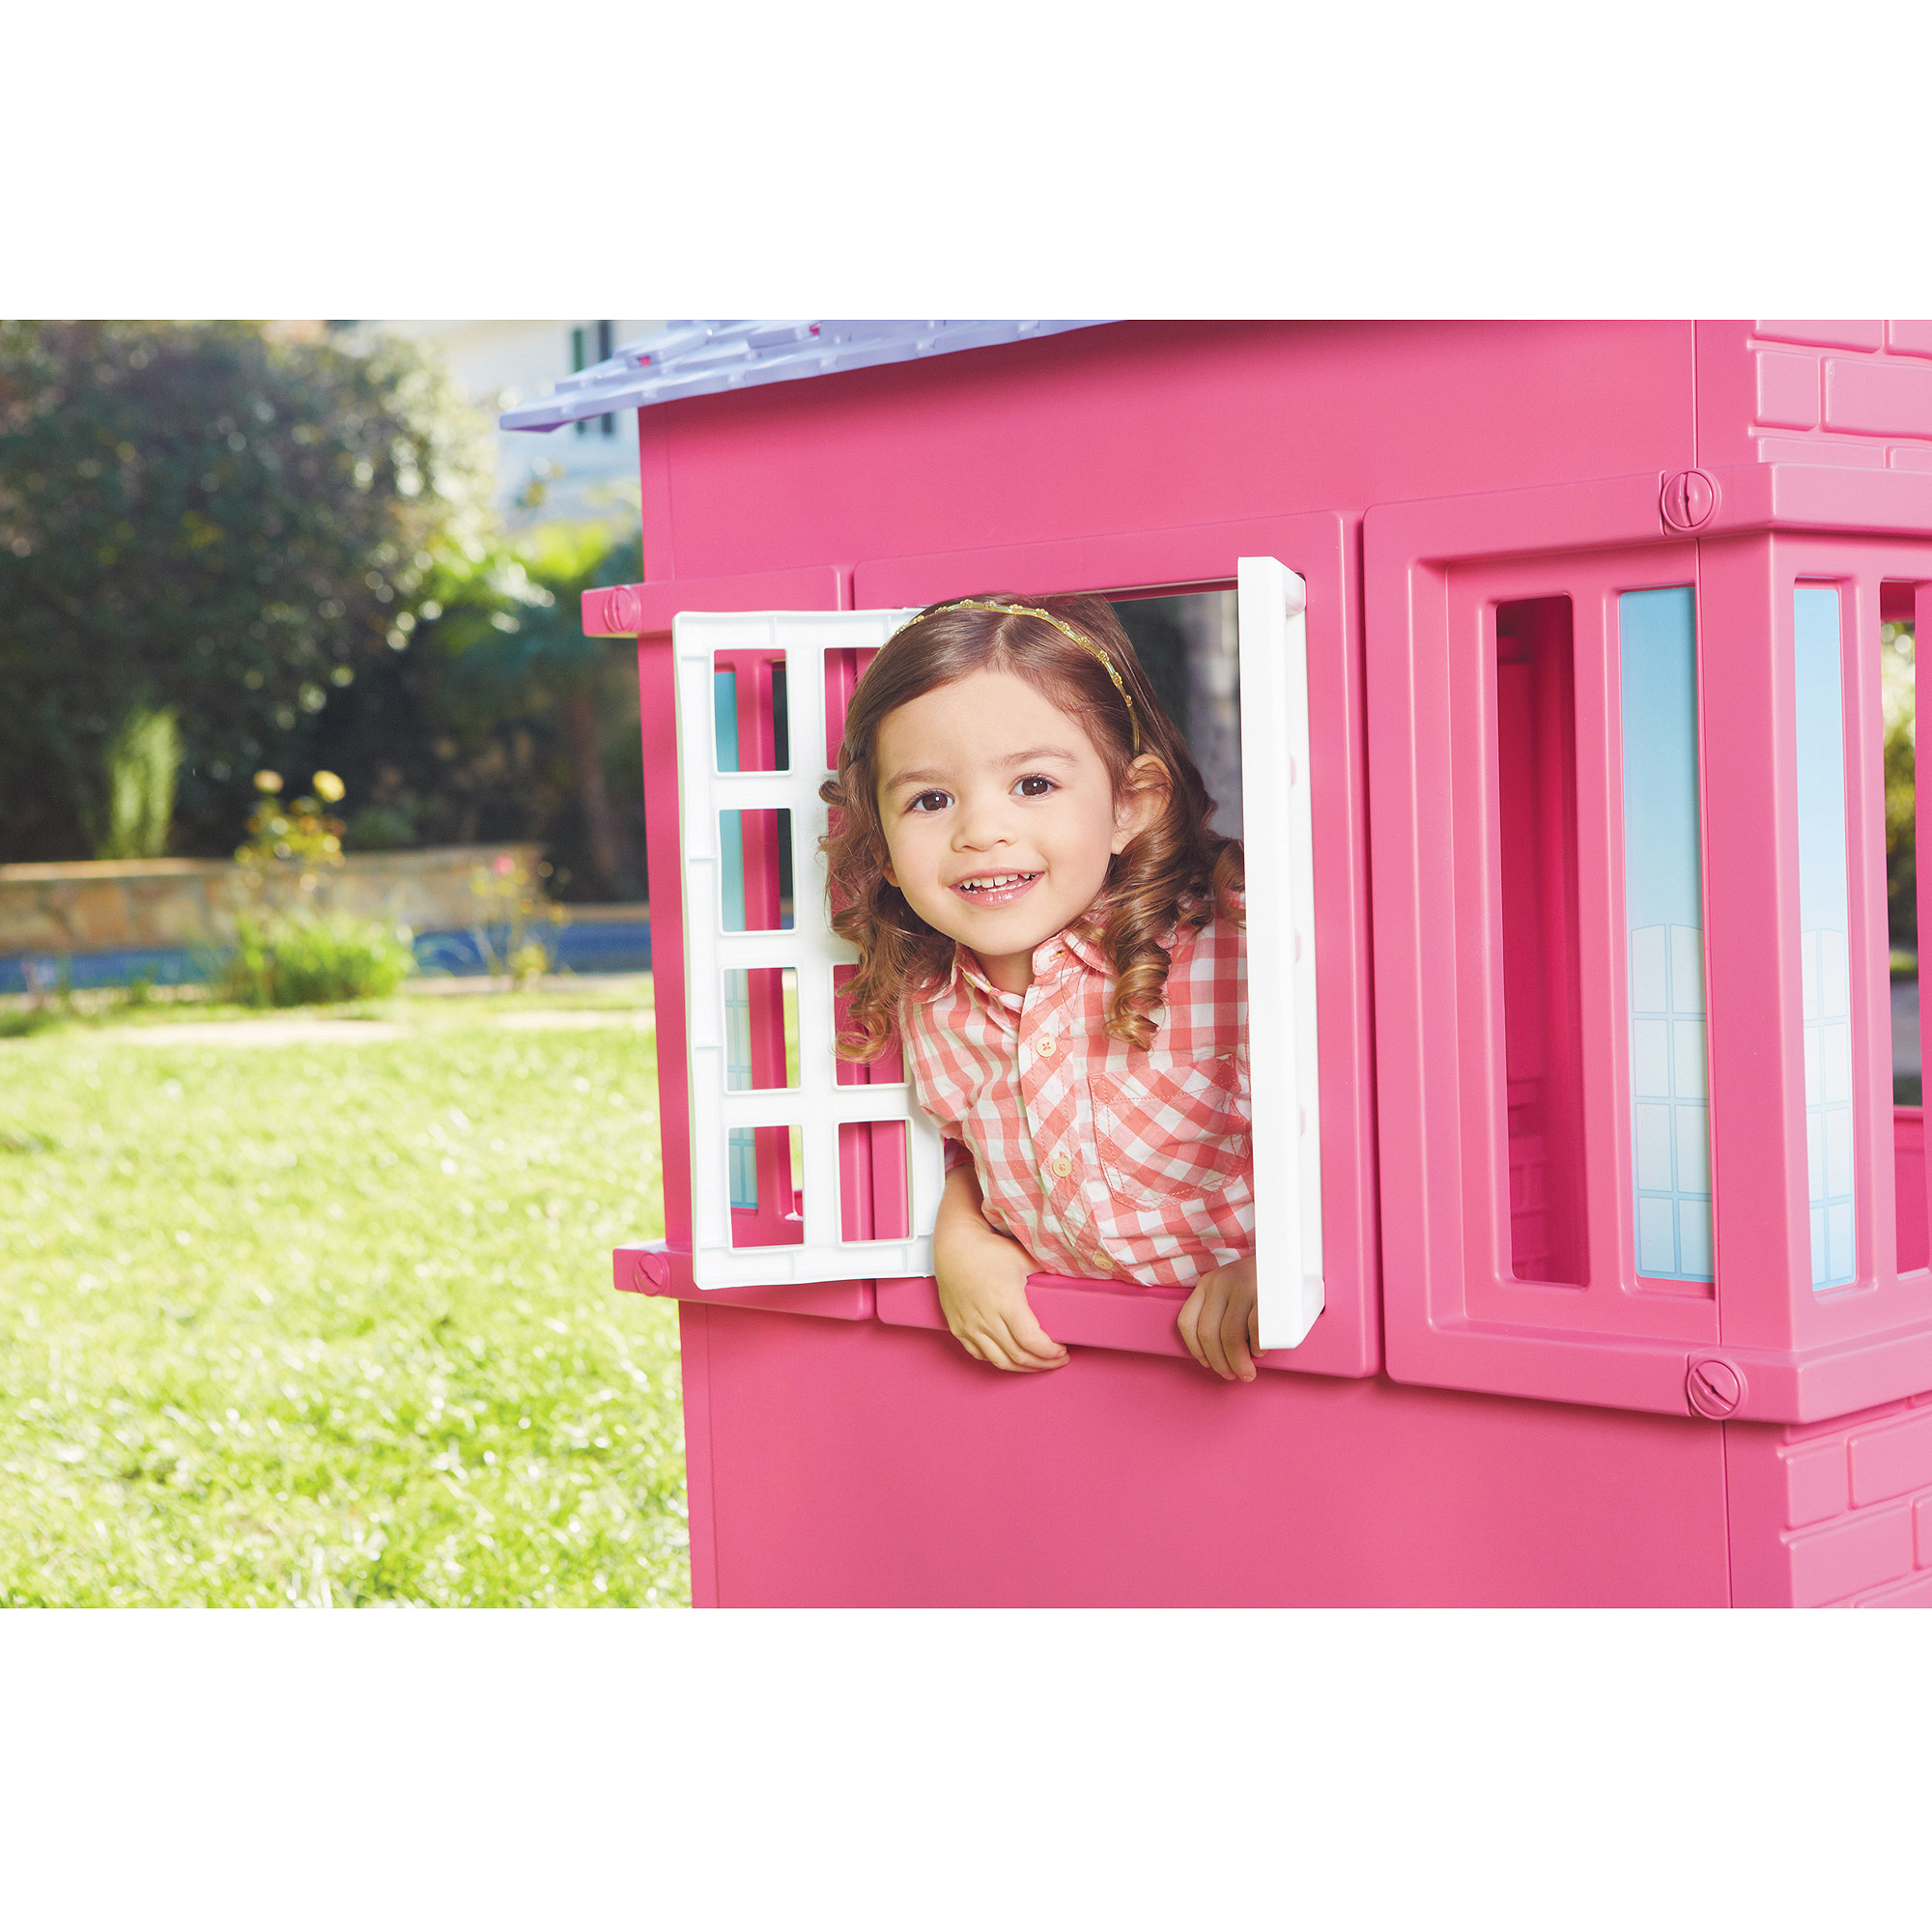 Little Tikes Cape Cottage Portable Indoor/Outdoor Backyard Playhouse House, Pink - image 4 of 6